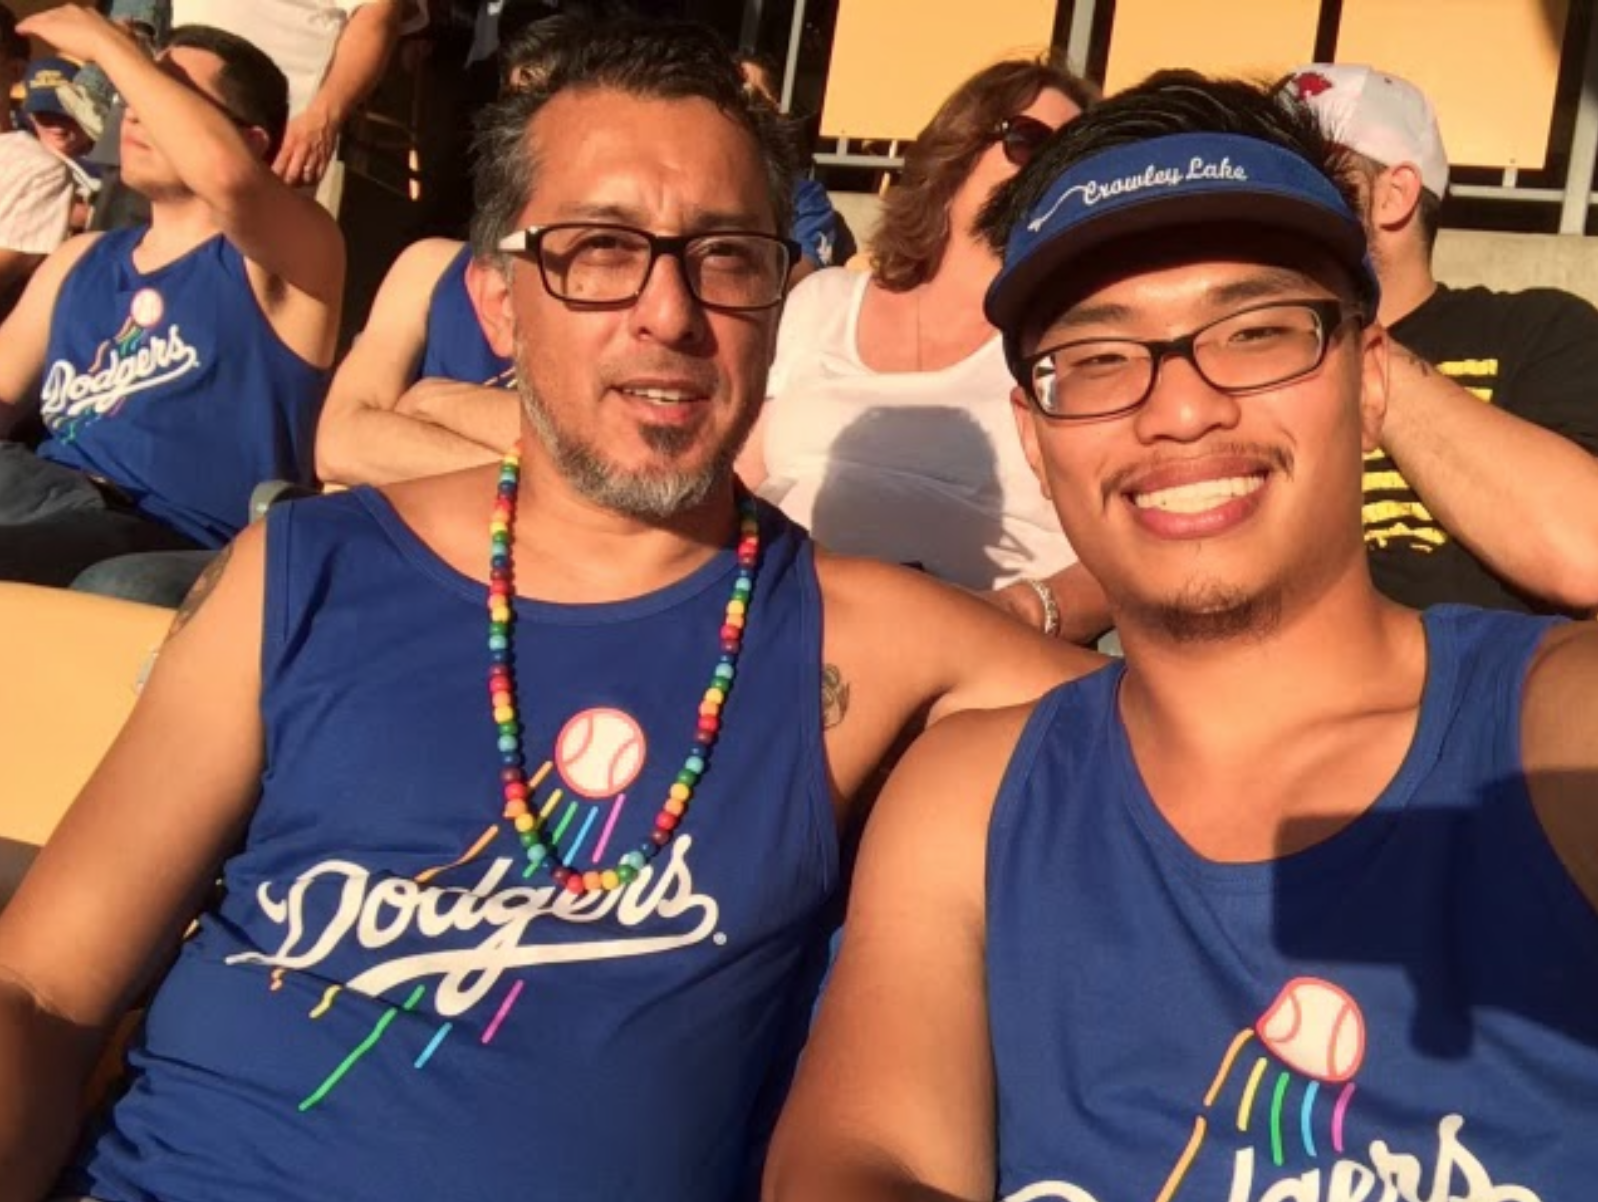 LA Archdiocese: Dodgers' decision to honor drag queen nuns